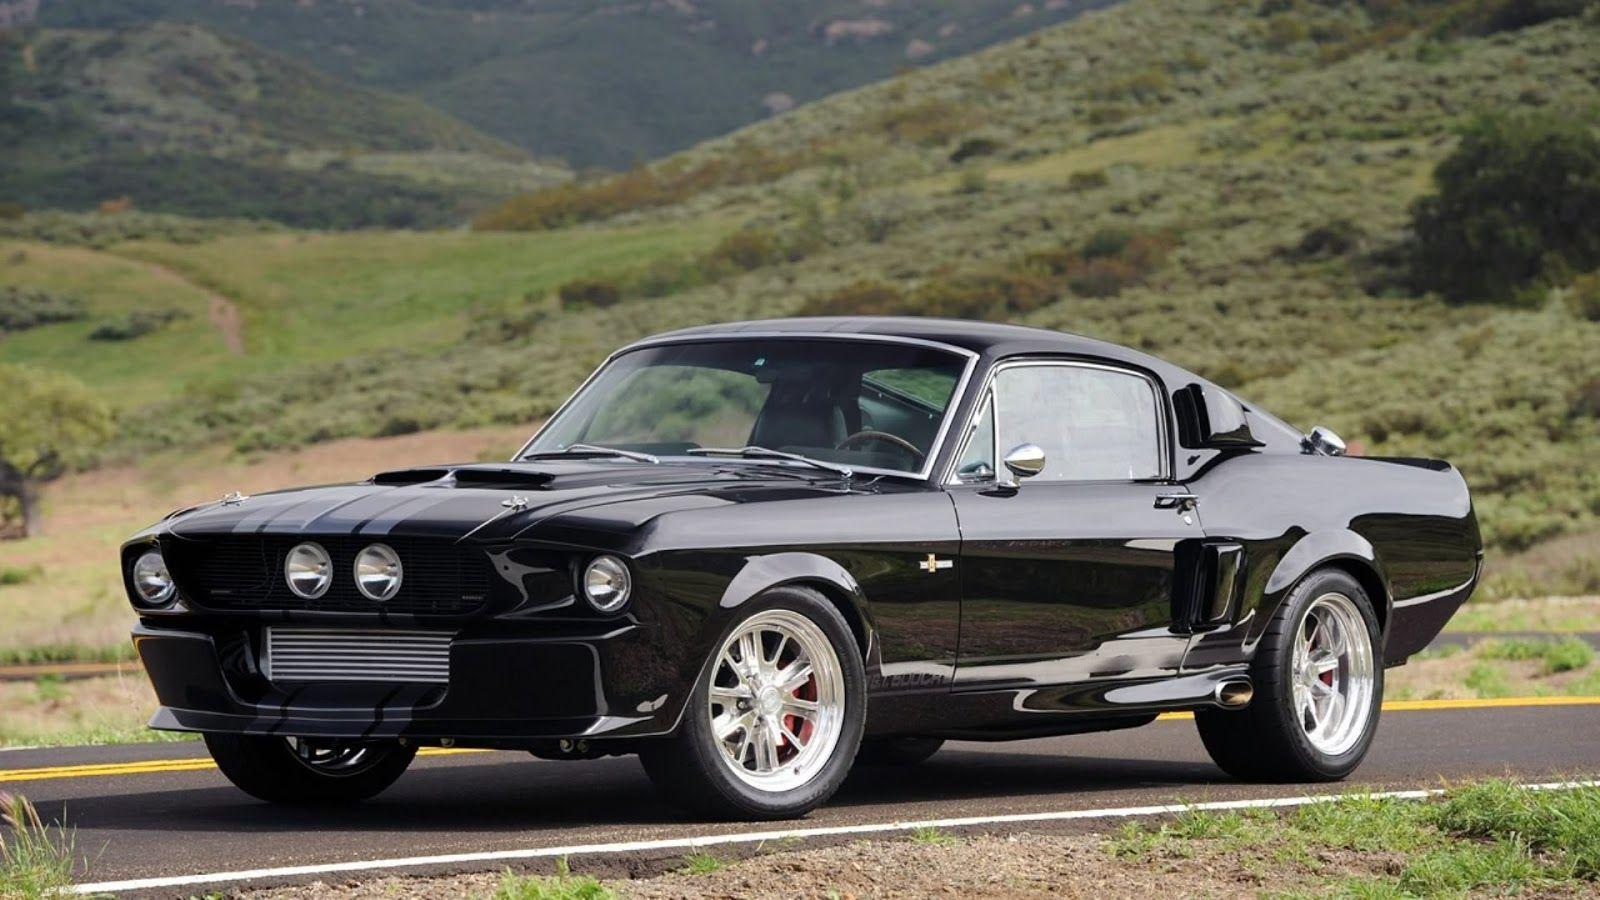 Ford Mustang Shelby GT500 1969 Wallpaper